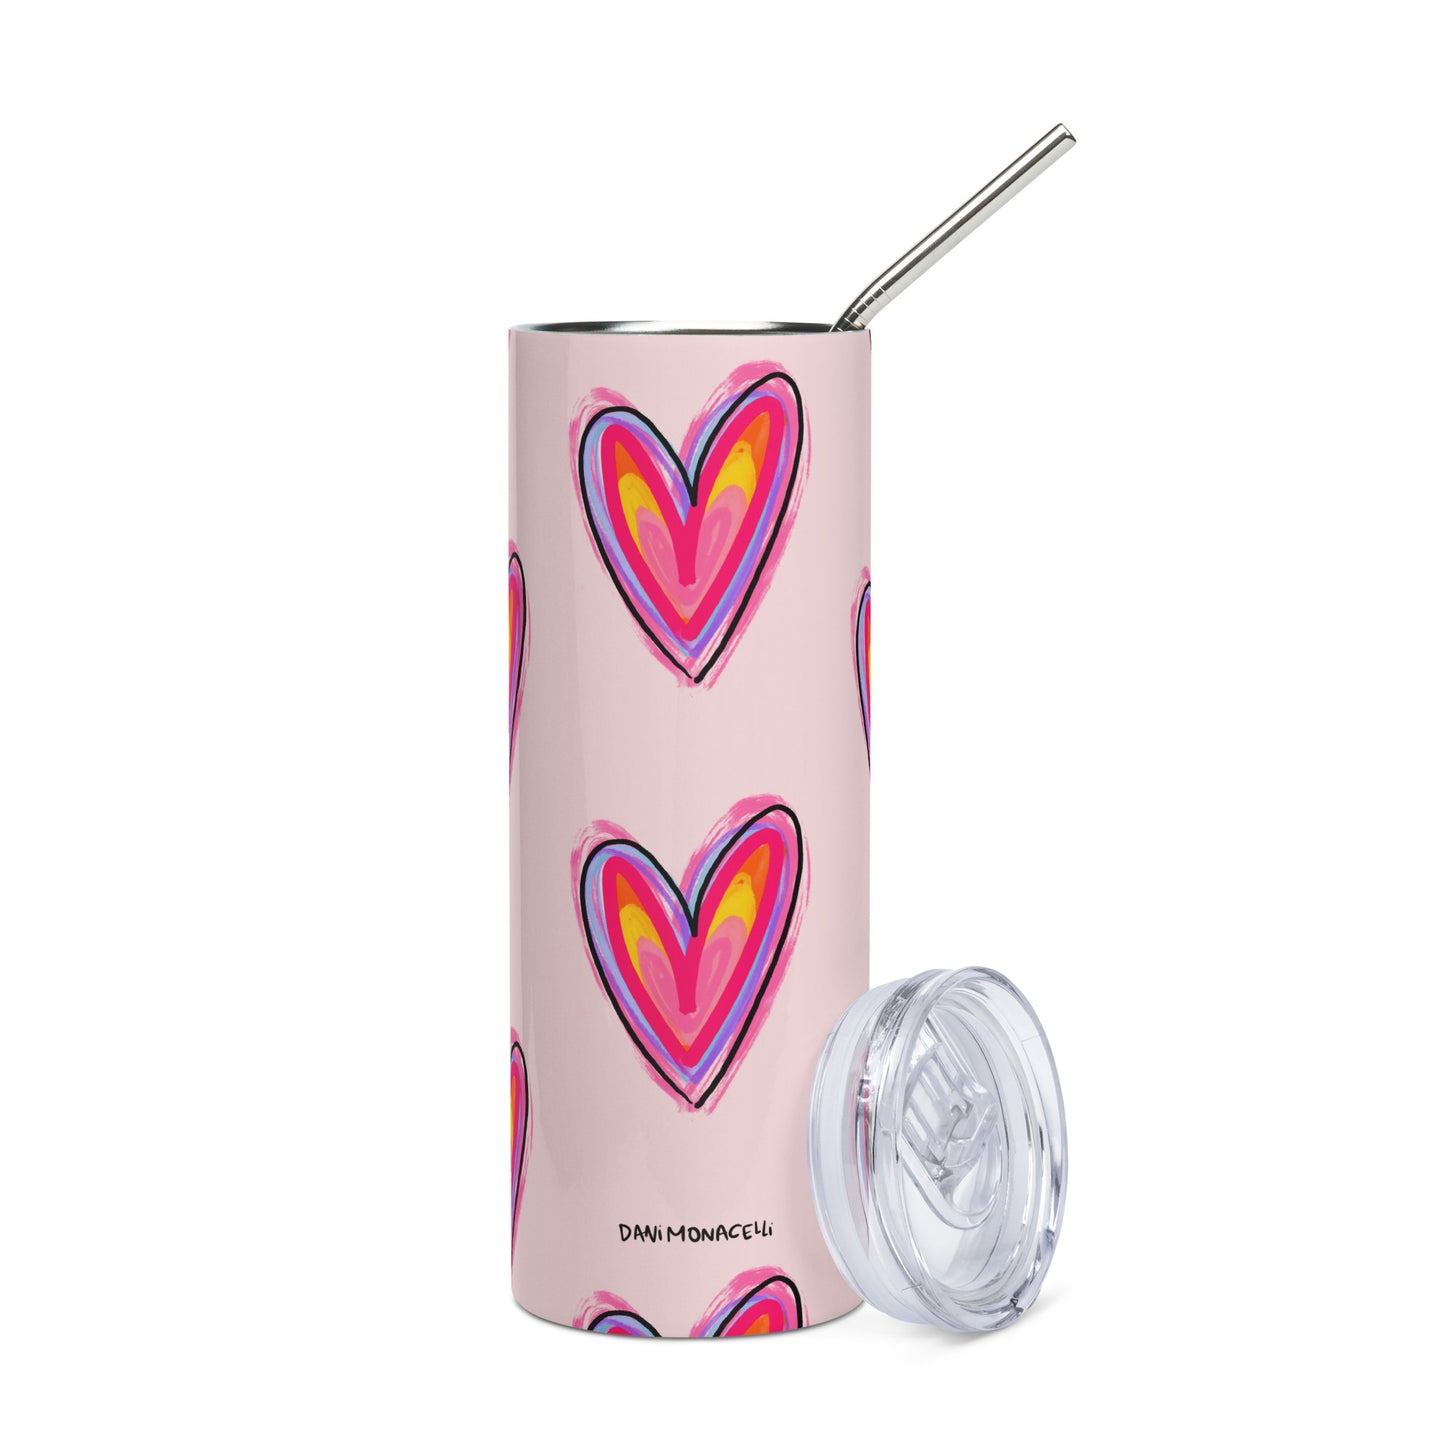 Stainless steel tumbler - Pink and purple hearts